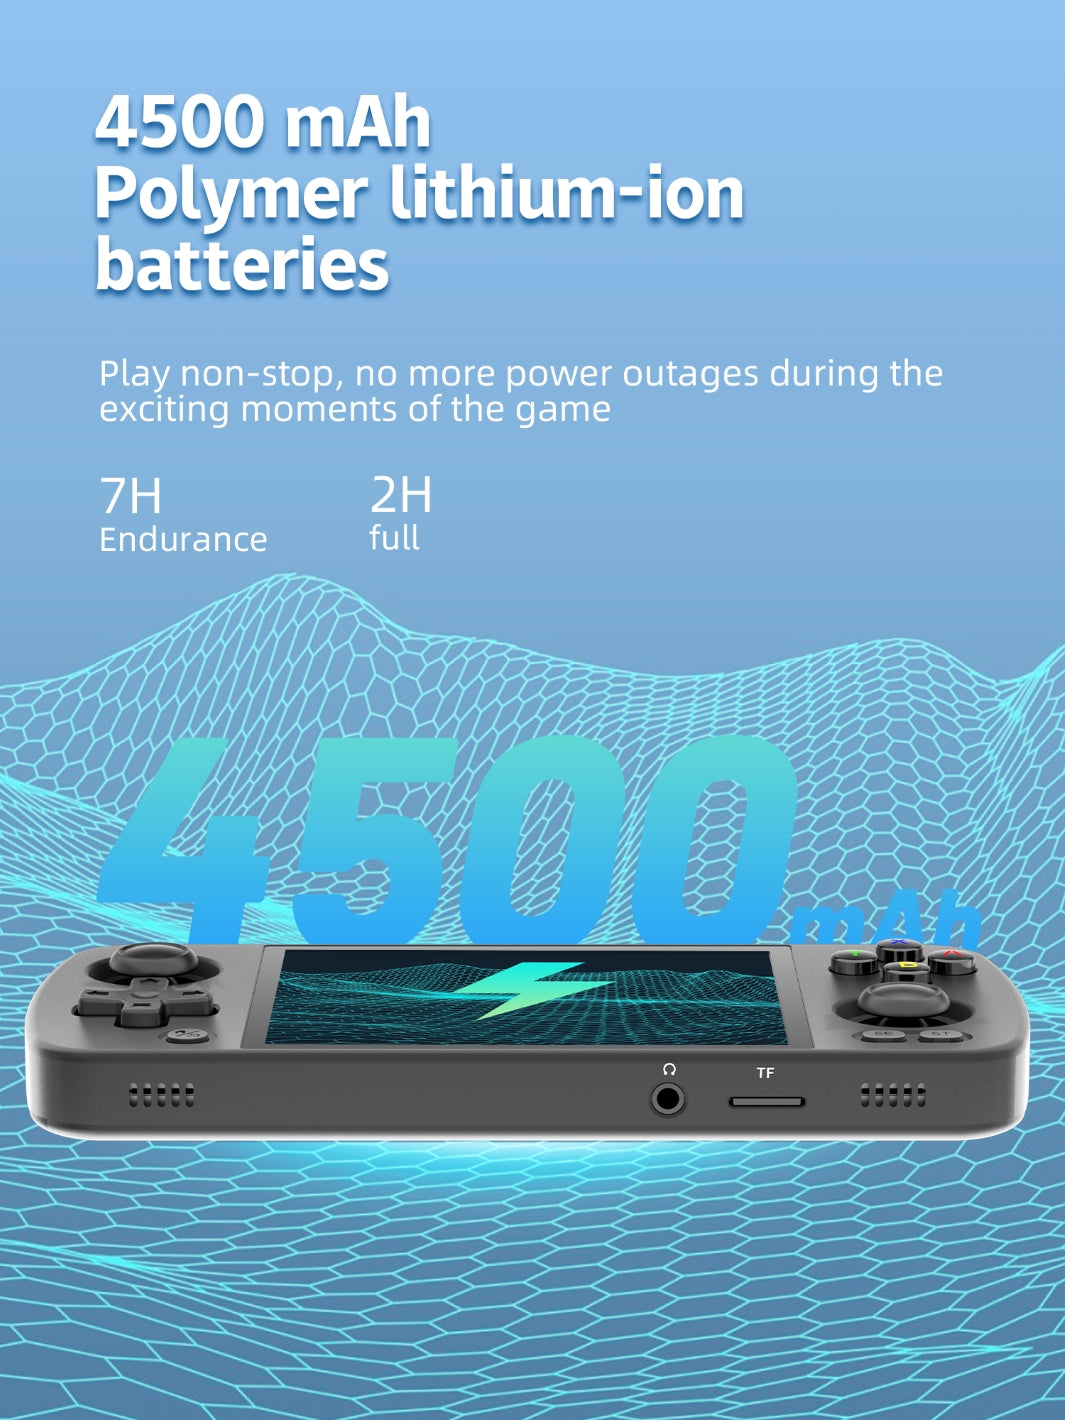 Anbernic RG405M boasting a large 4500mAh battery providing non-stop game playtime for 7 hours straight